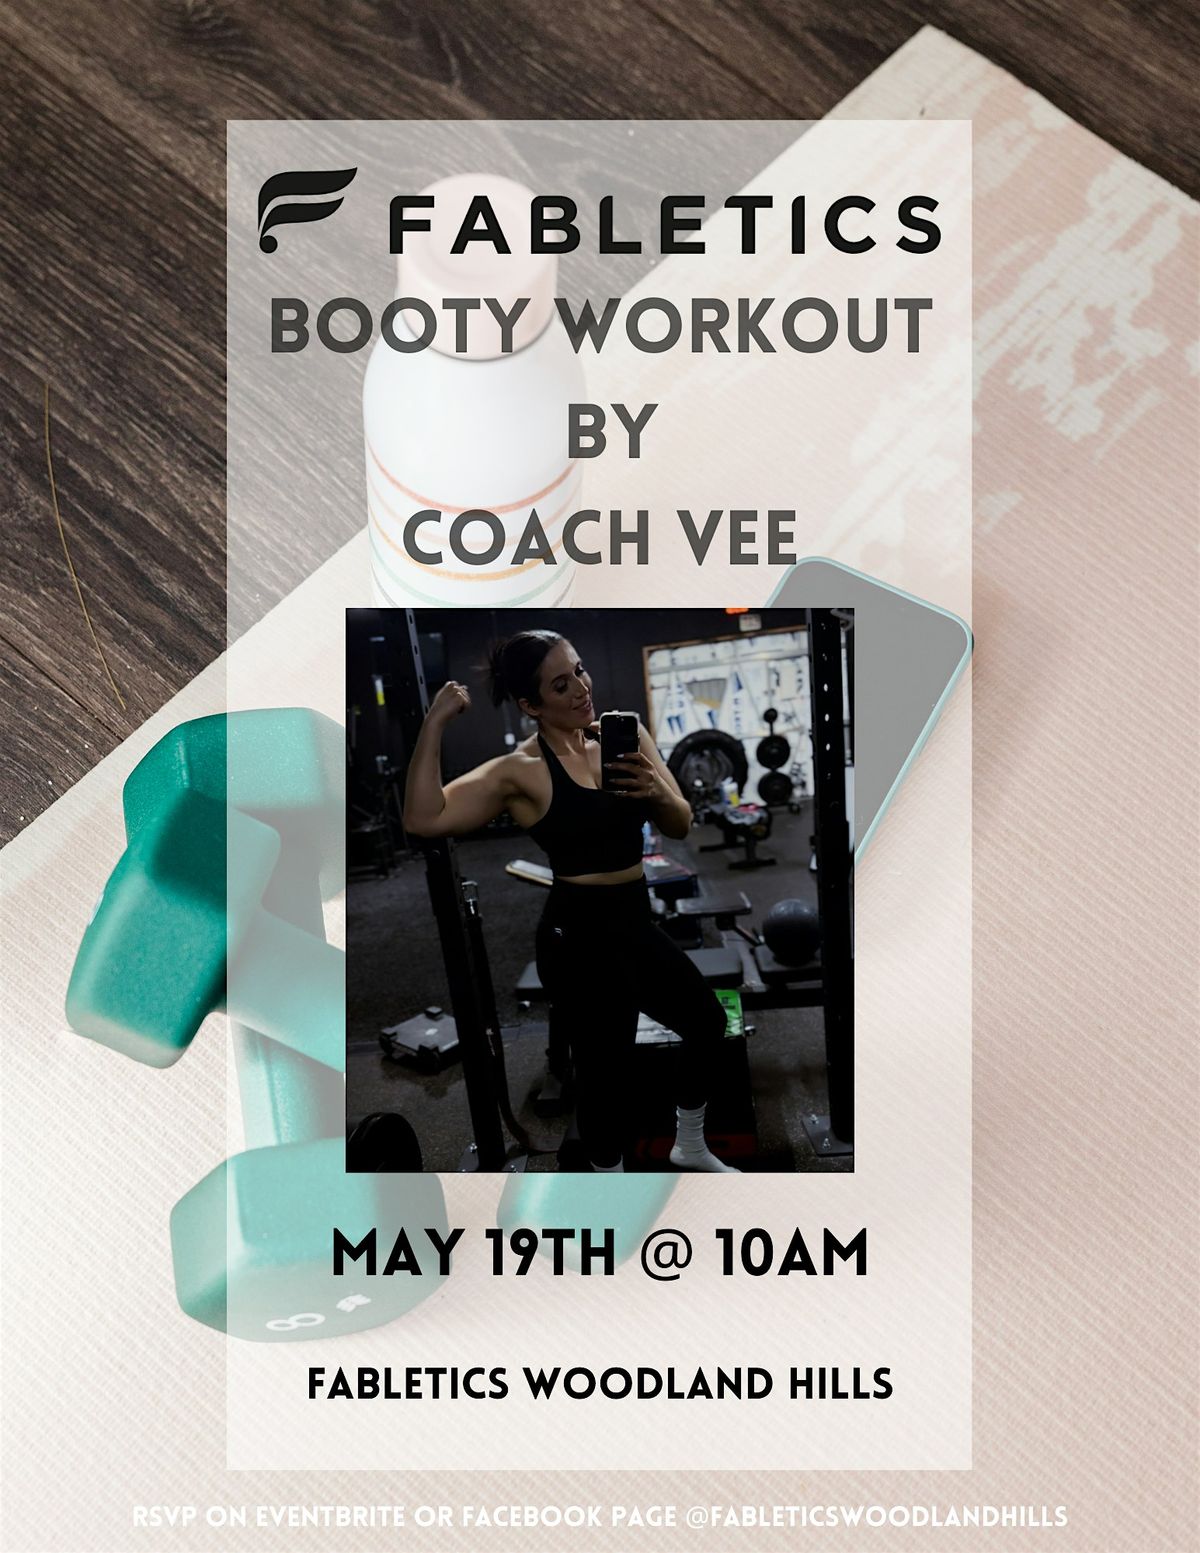 Fabletics FREE Booty Workout by Coach Vee